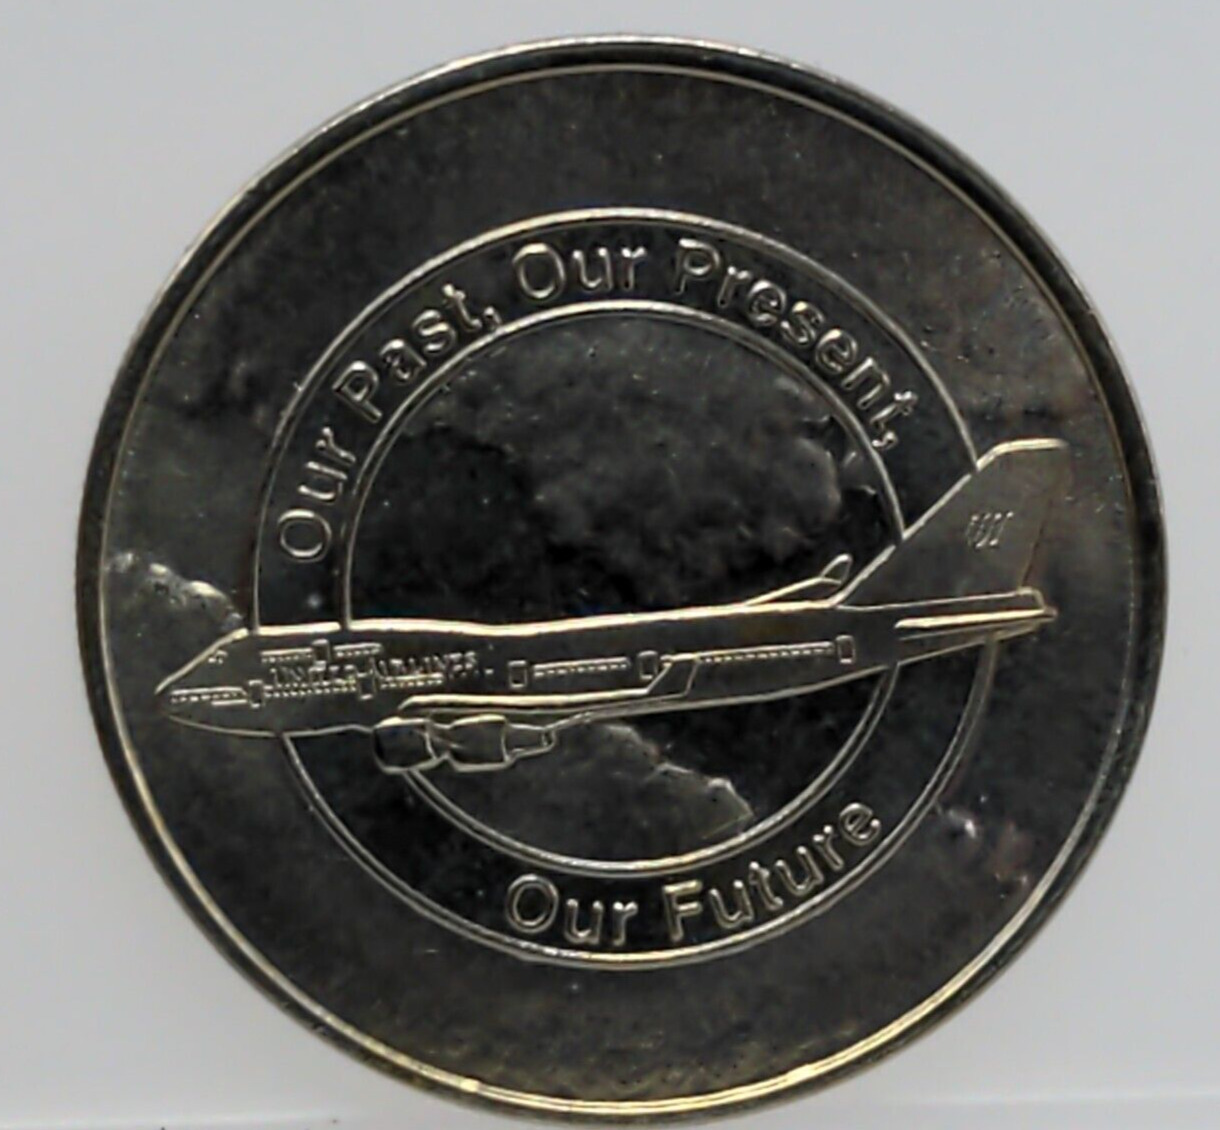 UNITED AIRLINES FLEET OPERATIONS Coin / Token 747